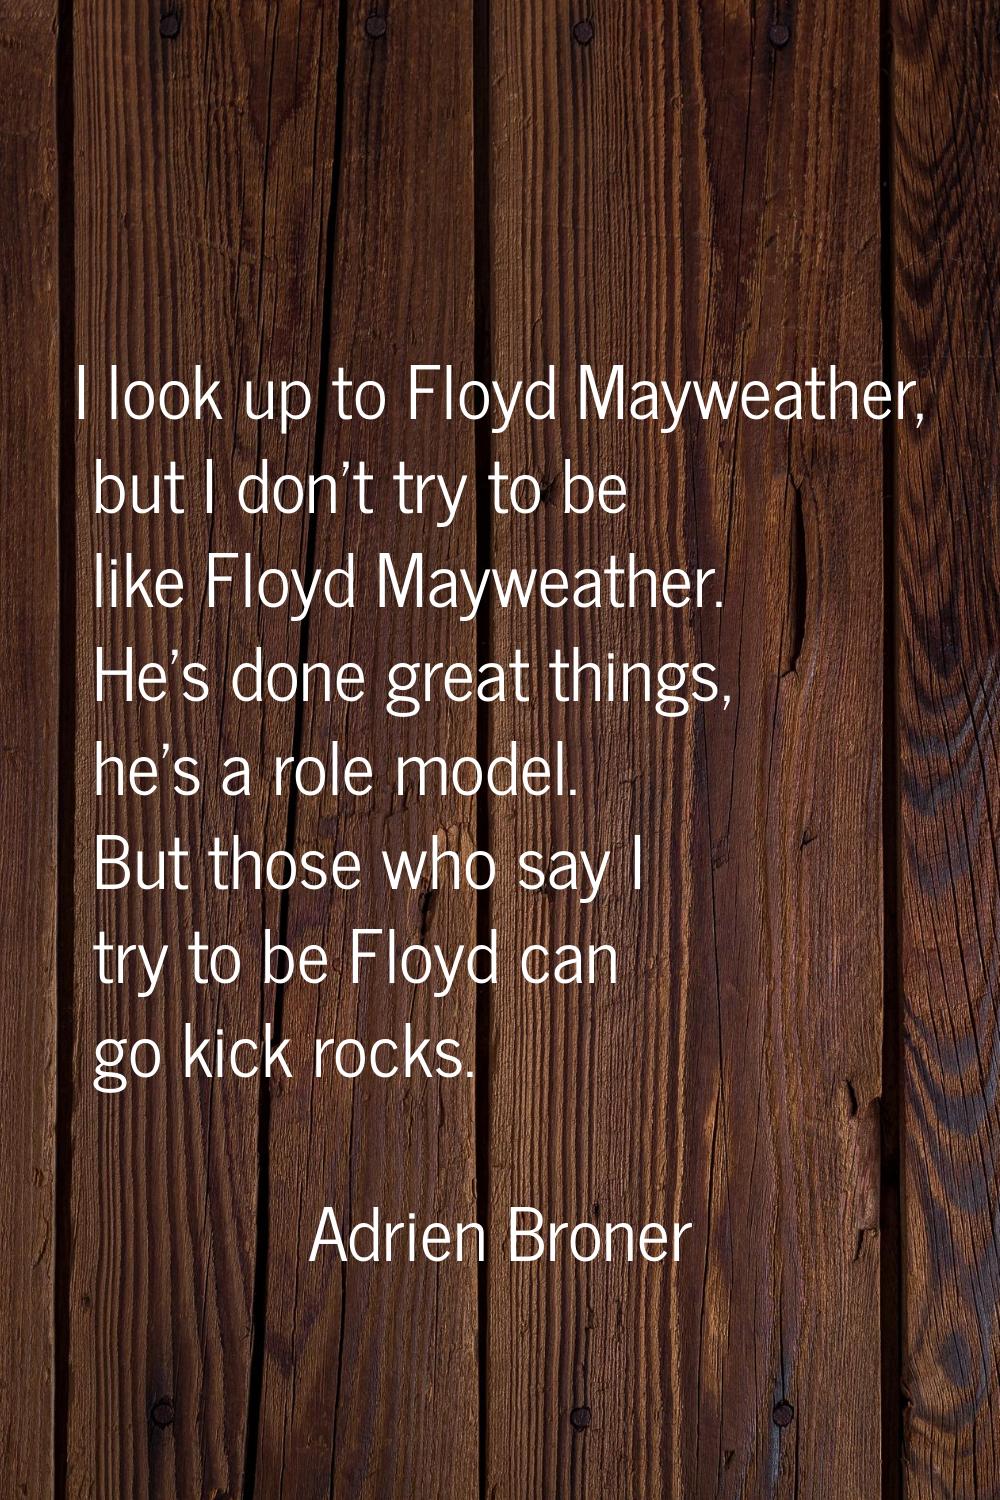 I look up to Floyd Mayweather, but I don't try to be like Floyd Mayweather. He's done great things,